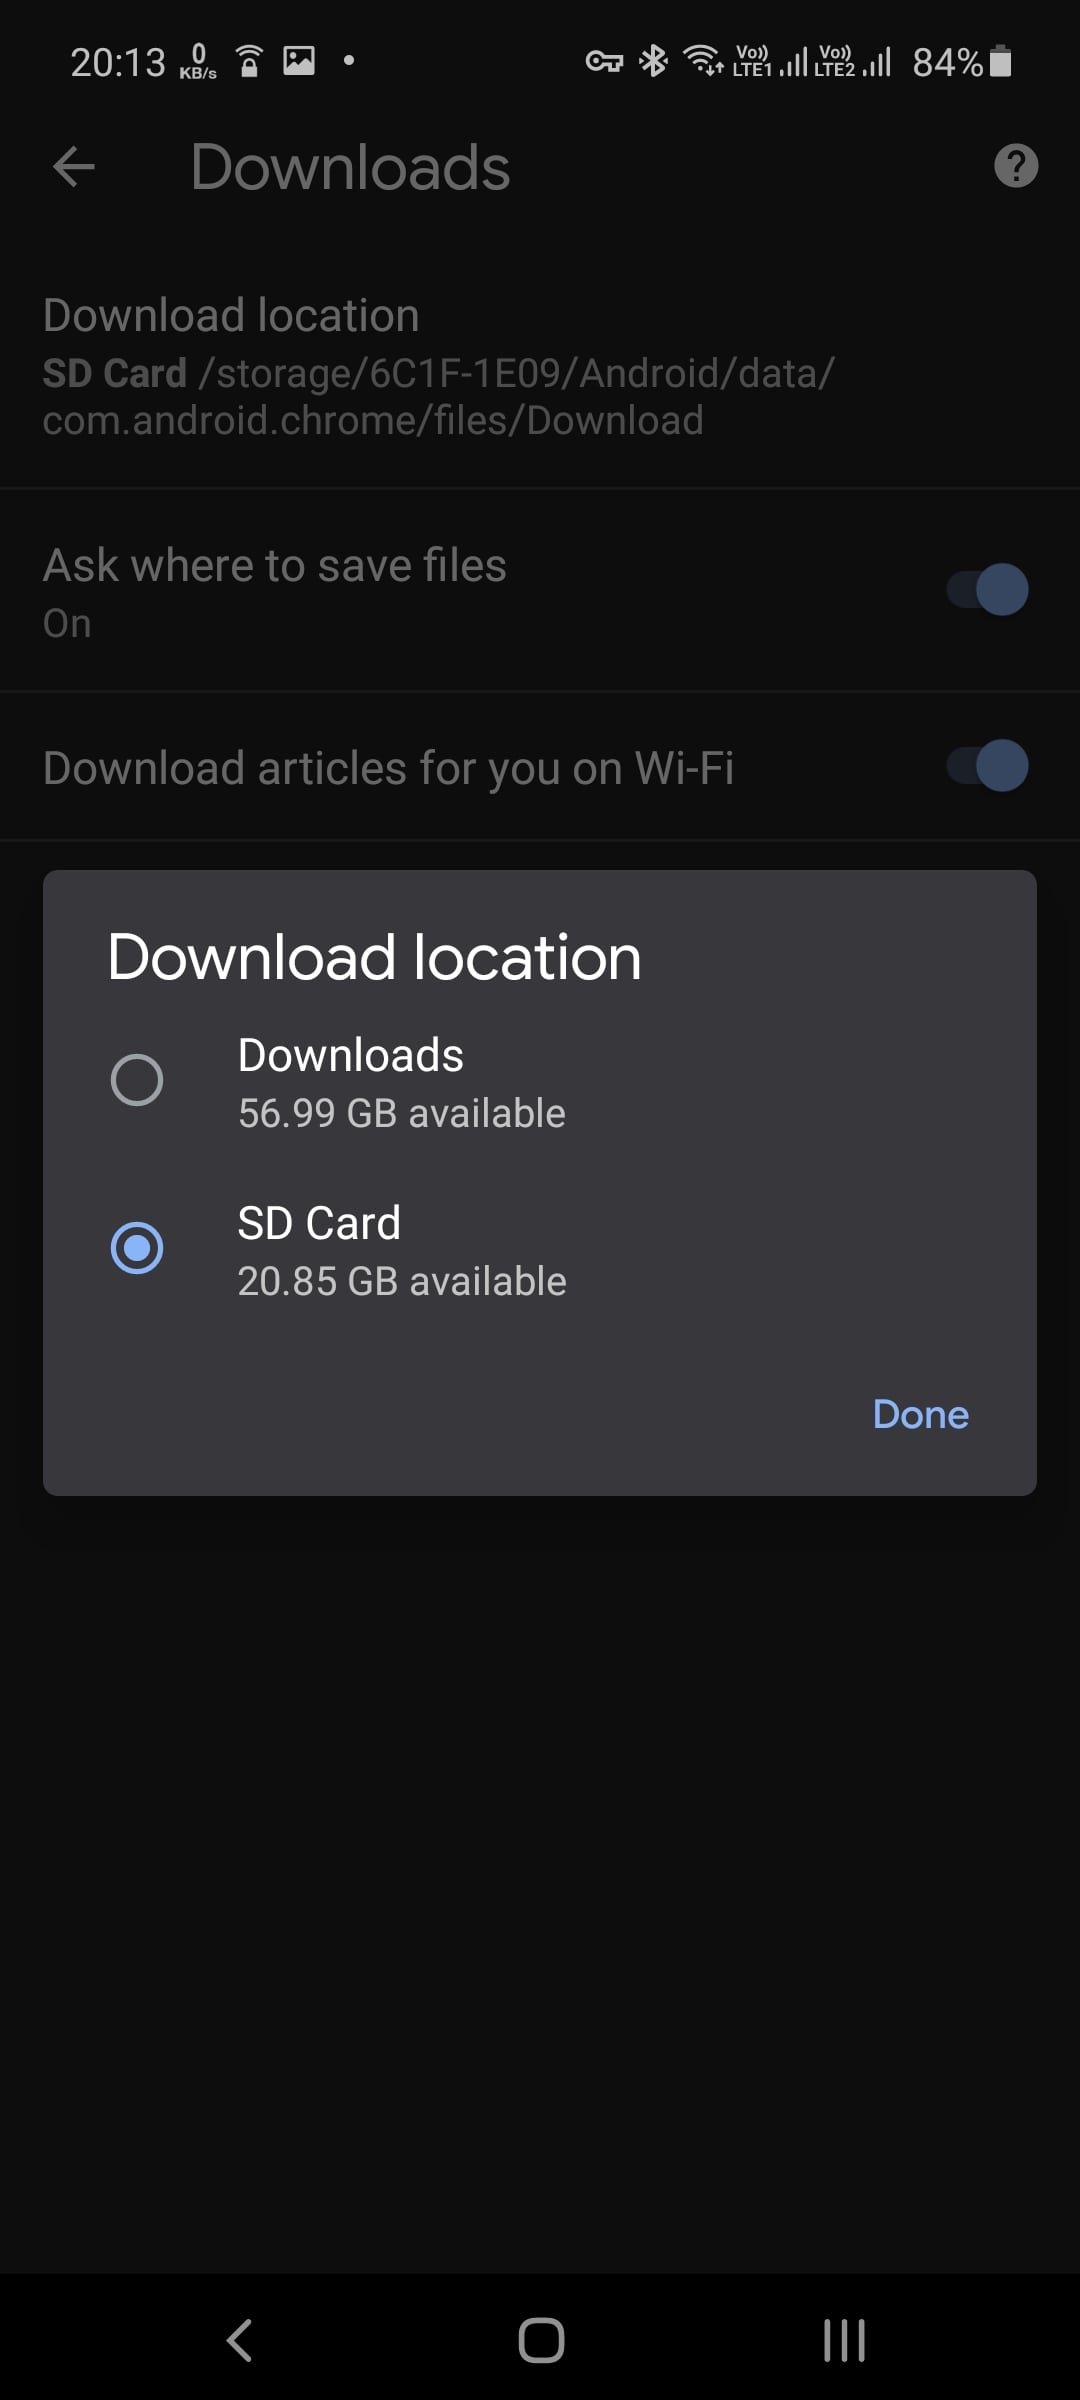 SD card selected as your download location